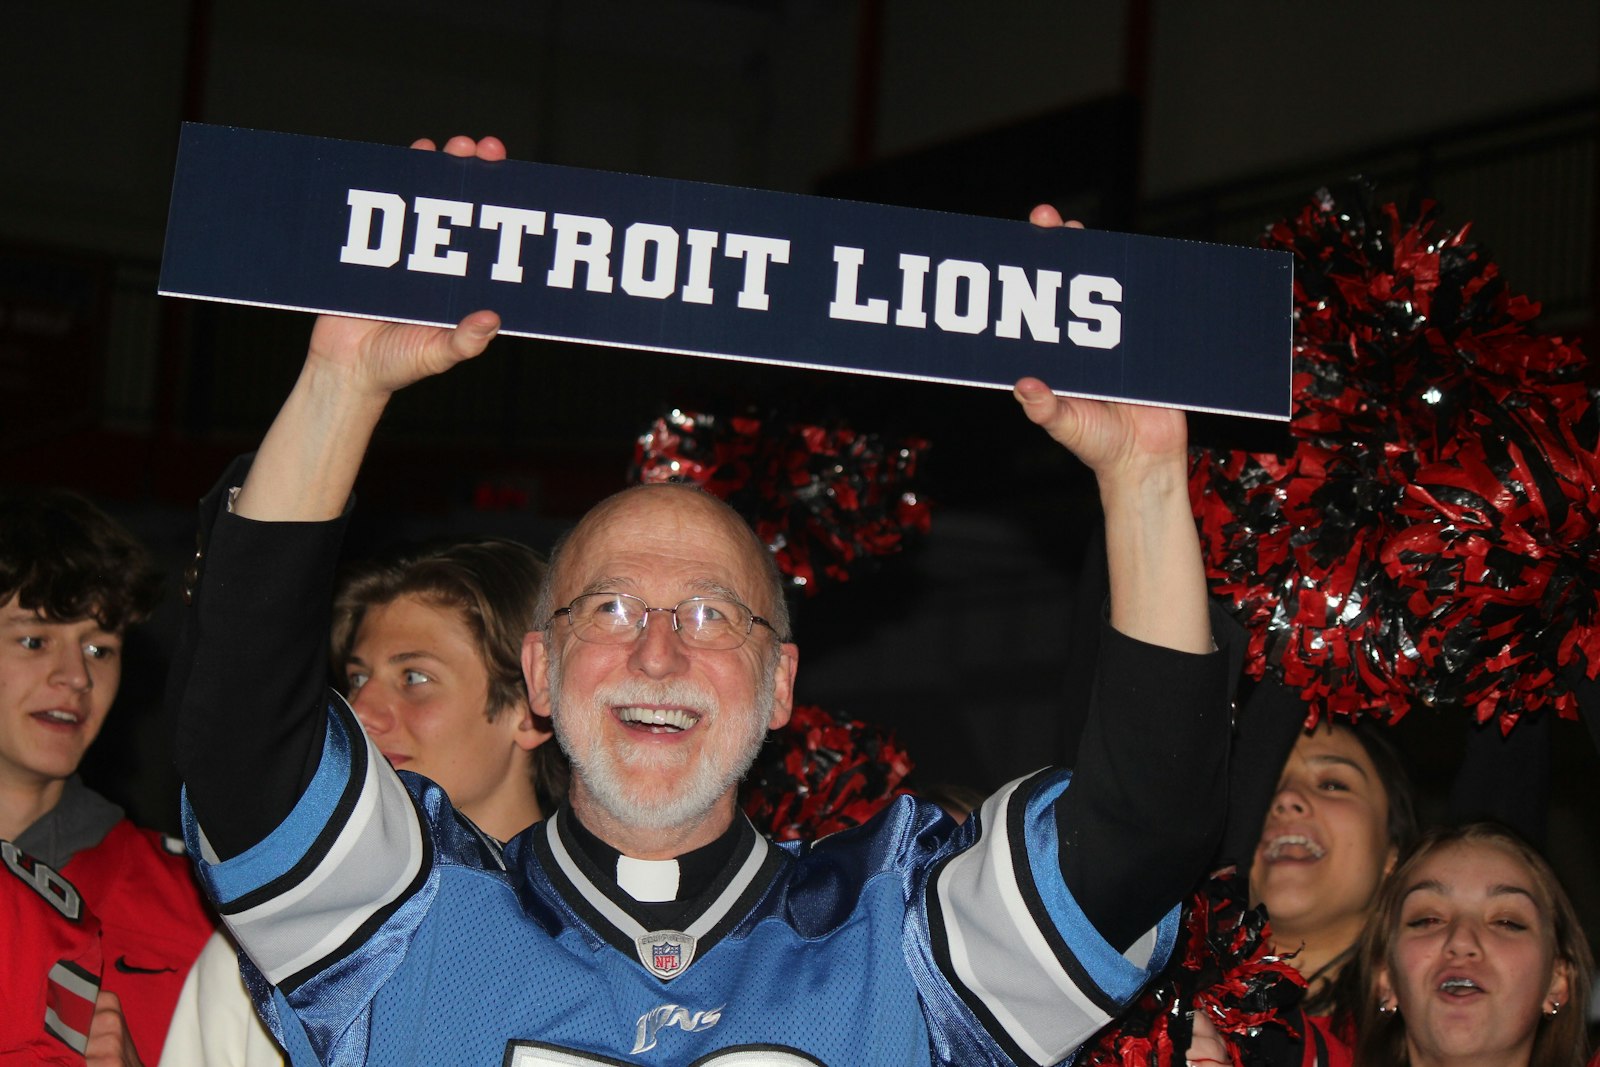 Divine Child pastor Fr. Bob McCabe brings out the Detroit Lions sign to attach to Aidan Hutchinson’s standee after he is announced as the Lions’ first draft pick.